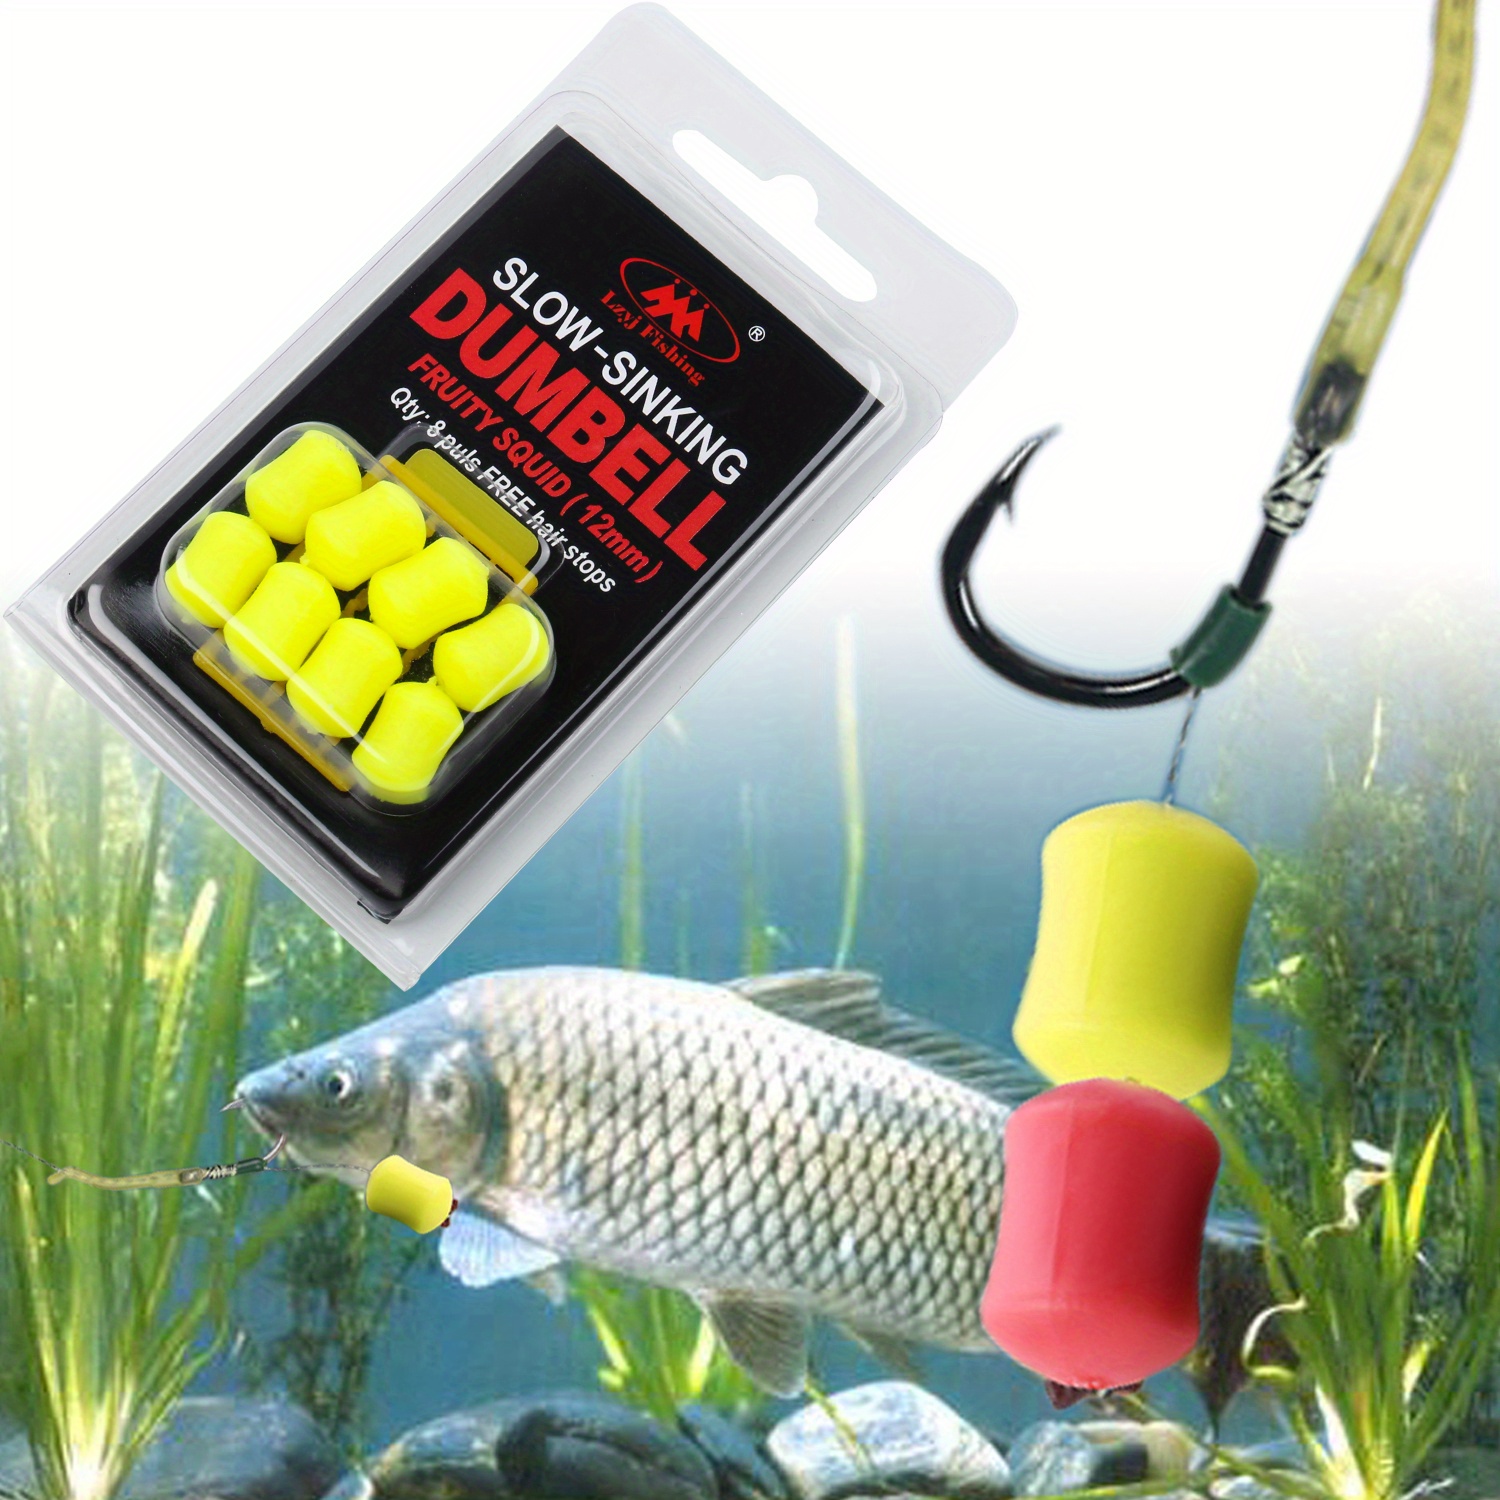 

8pcs Bright Color Dumbbell Bait, Slow Sinking Rig Bait, Fishing Accessories